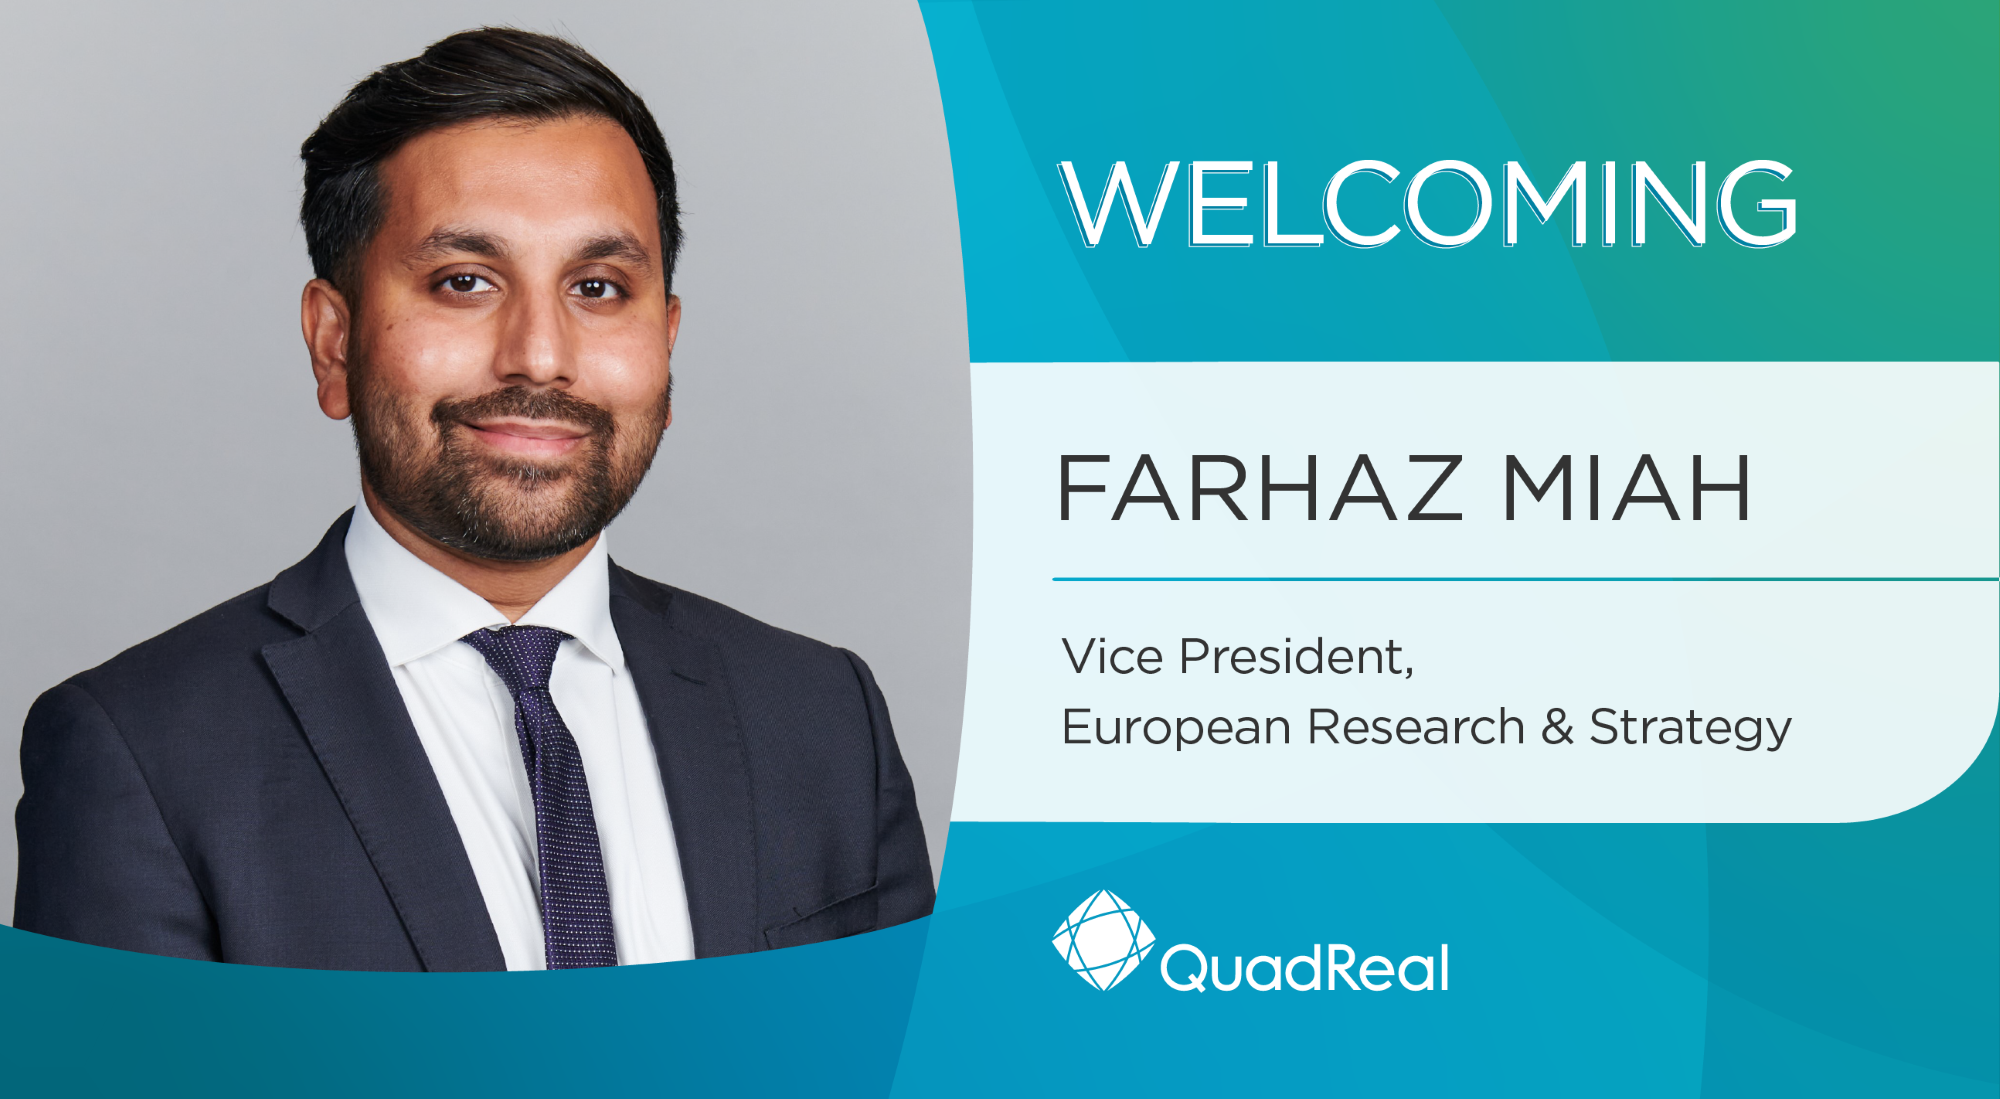 Welcoming Farhaz Miah, Vice President, European Research and Strategy